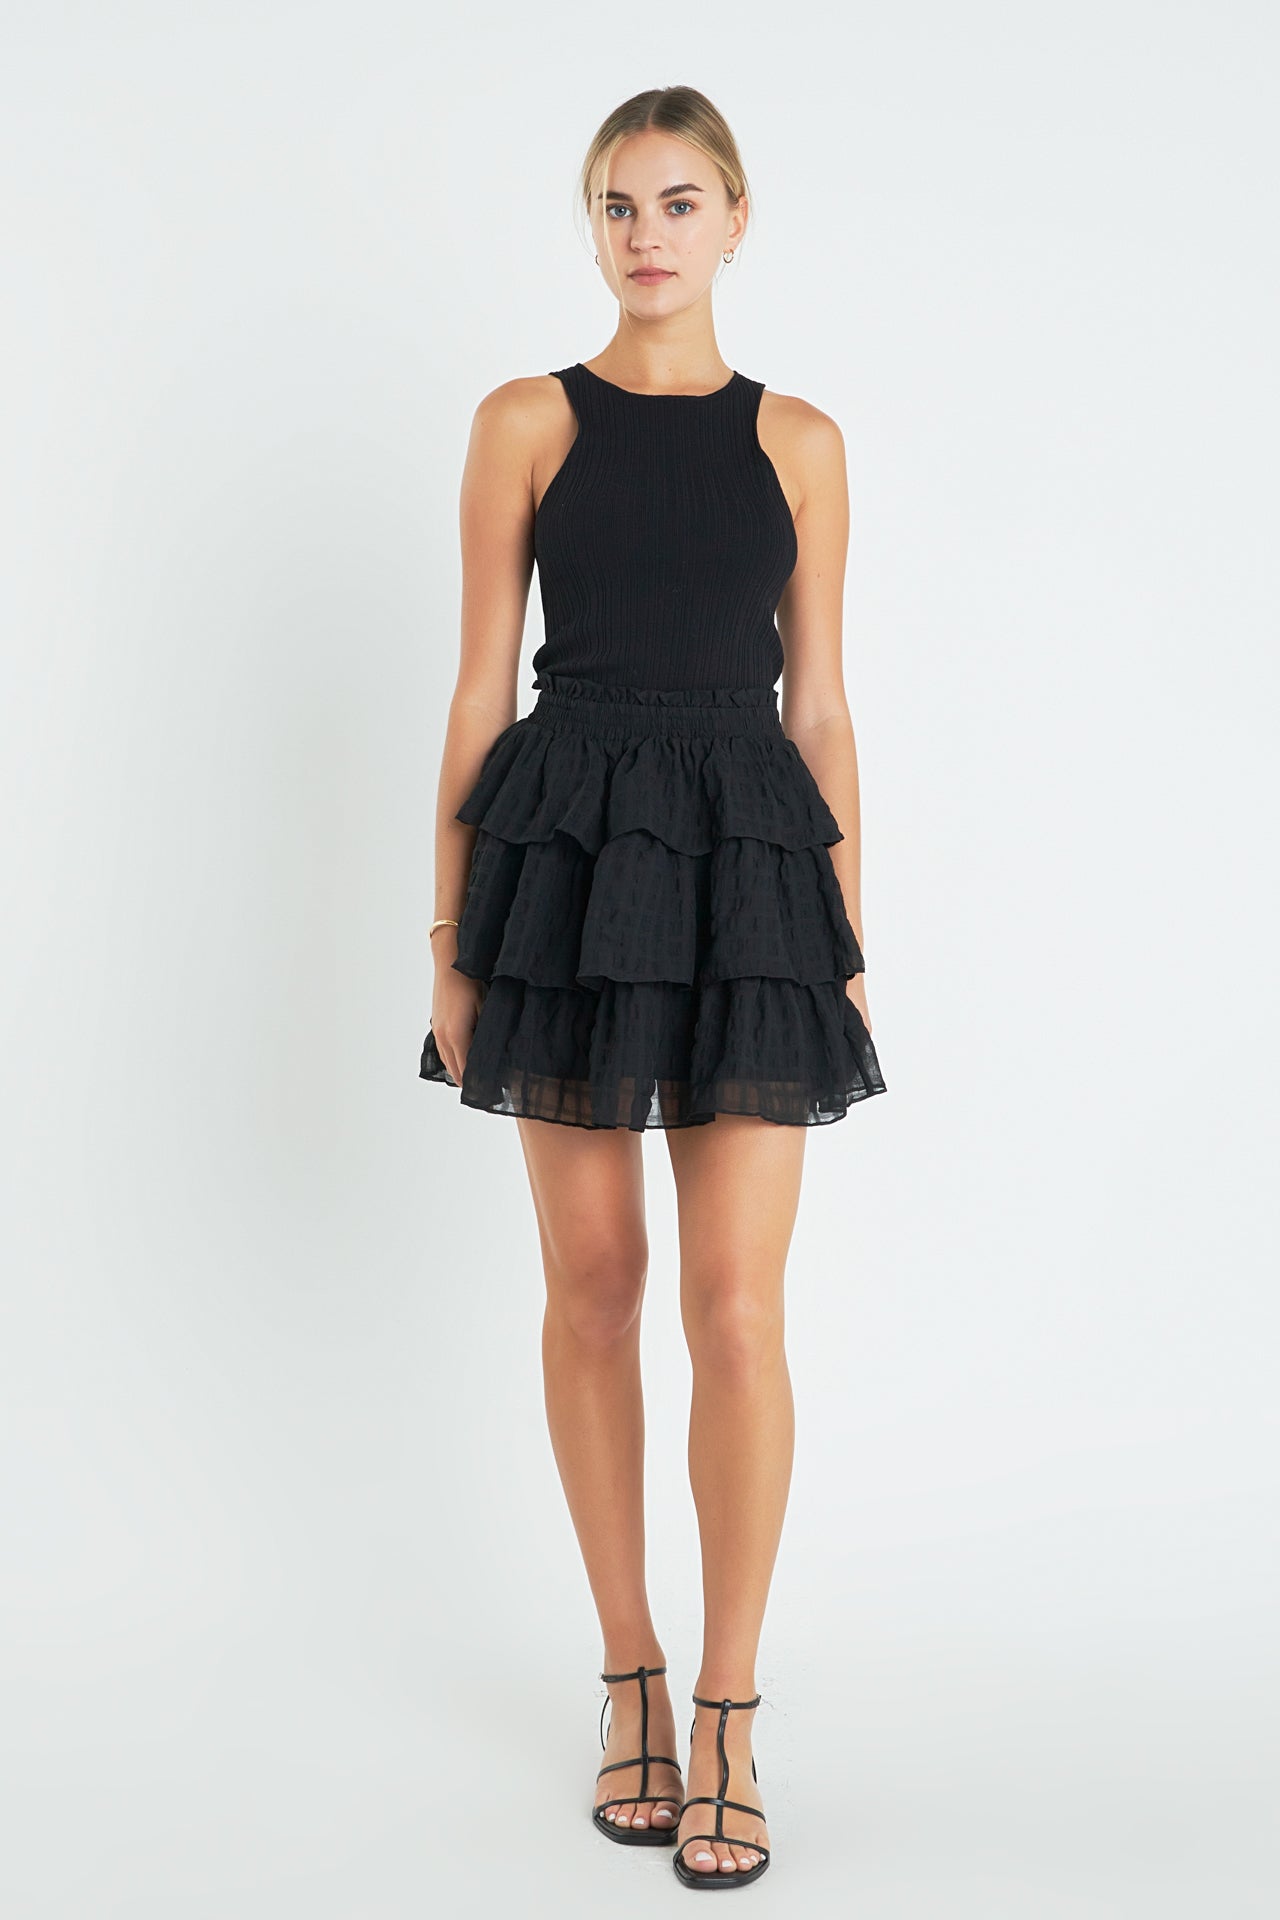 ENGLISH FACTORY - Gingham Chiffon Tiered Mini Skirt - SKIRTS available at Objectrare